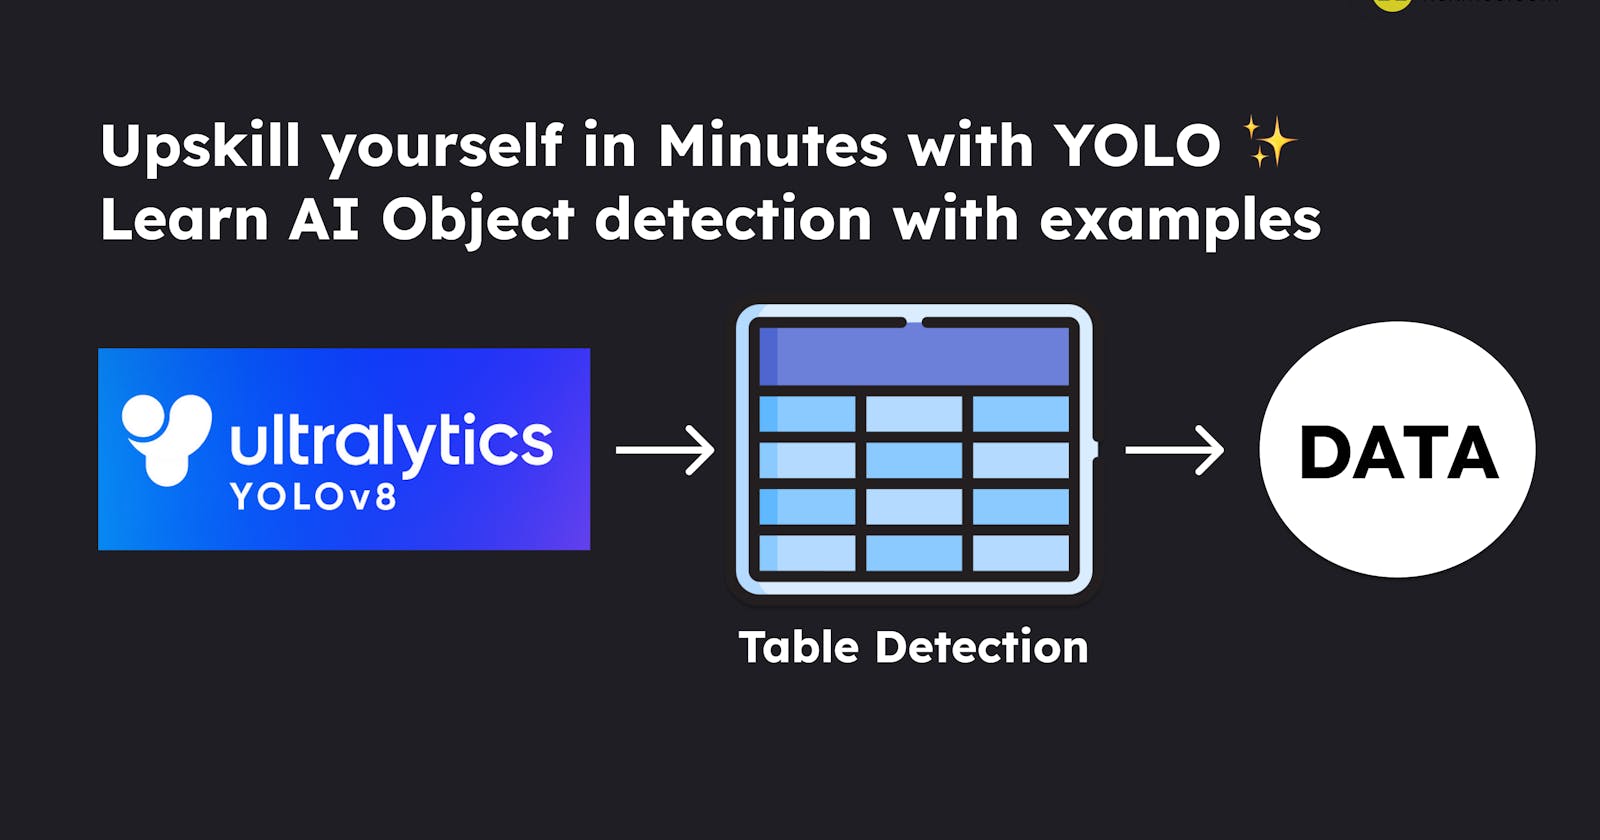 Breaking the Myth: Object Detection Isn't Hard as Thought